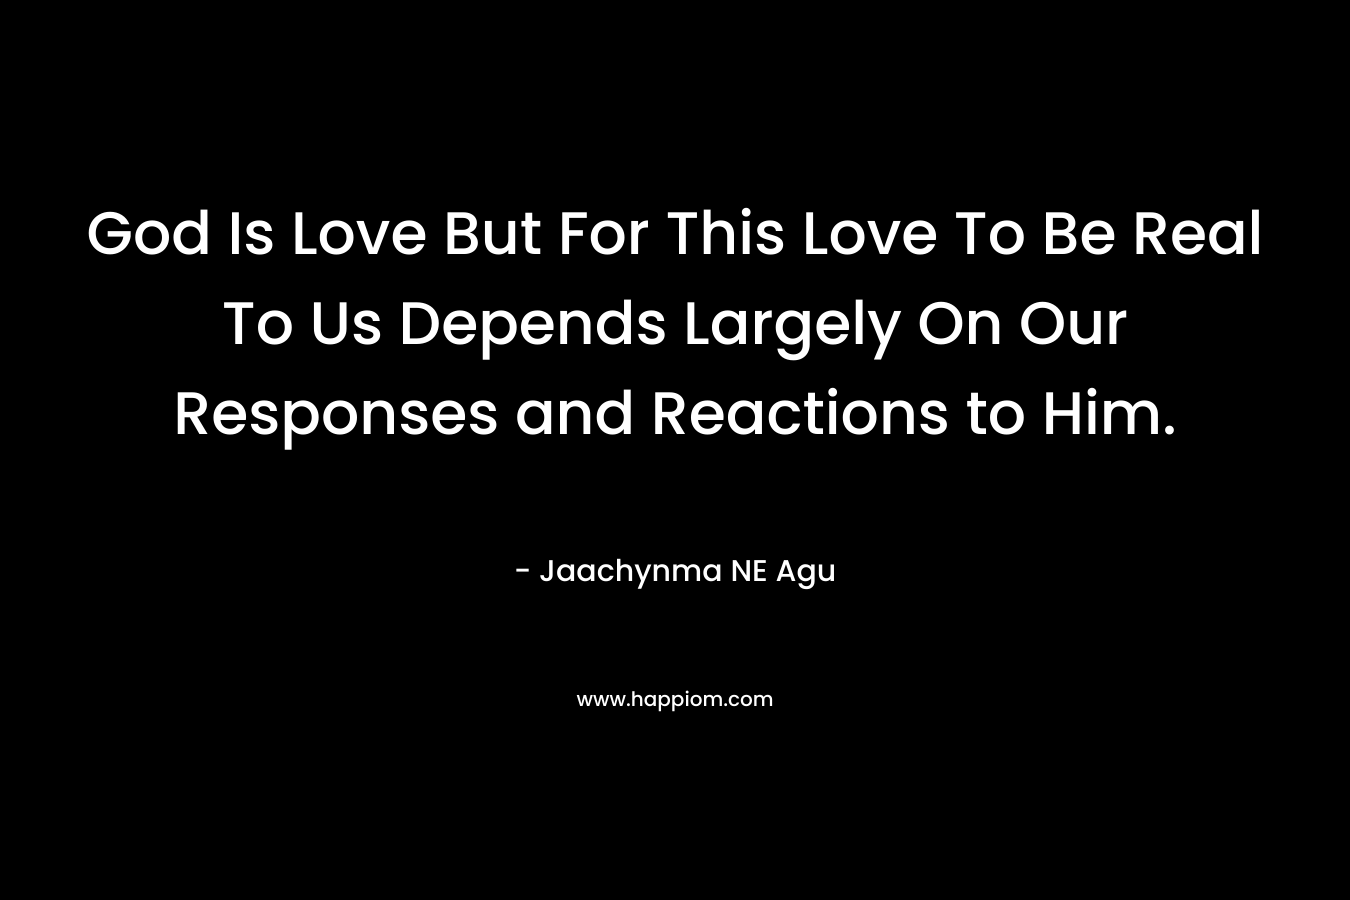 God Is Love But For This Love To Be Real To Us Depends Largely On Our Responses and Reactions to Him. – Jaachynma NE Agu